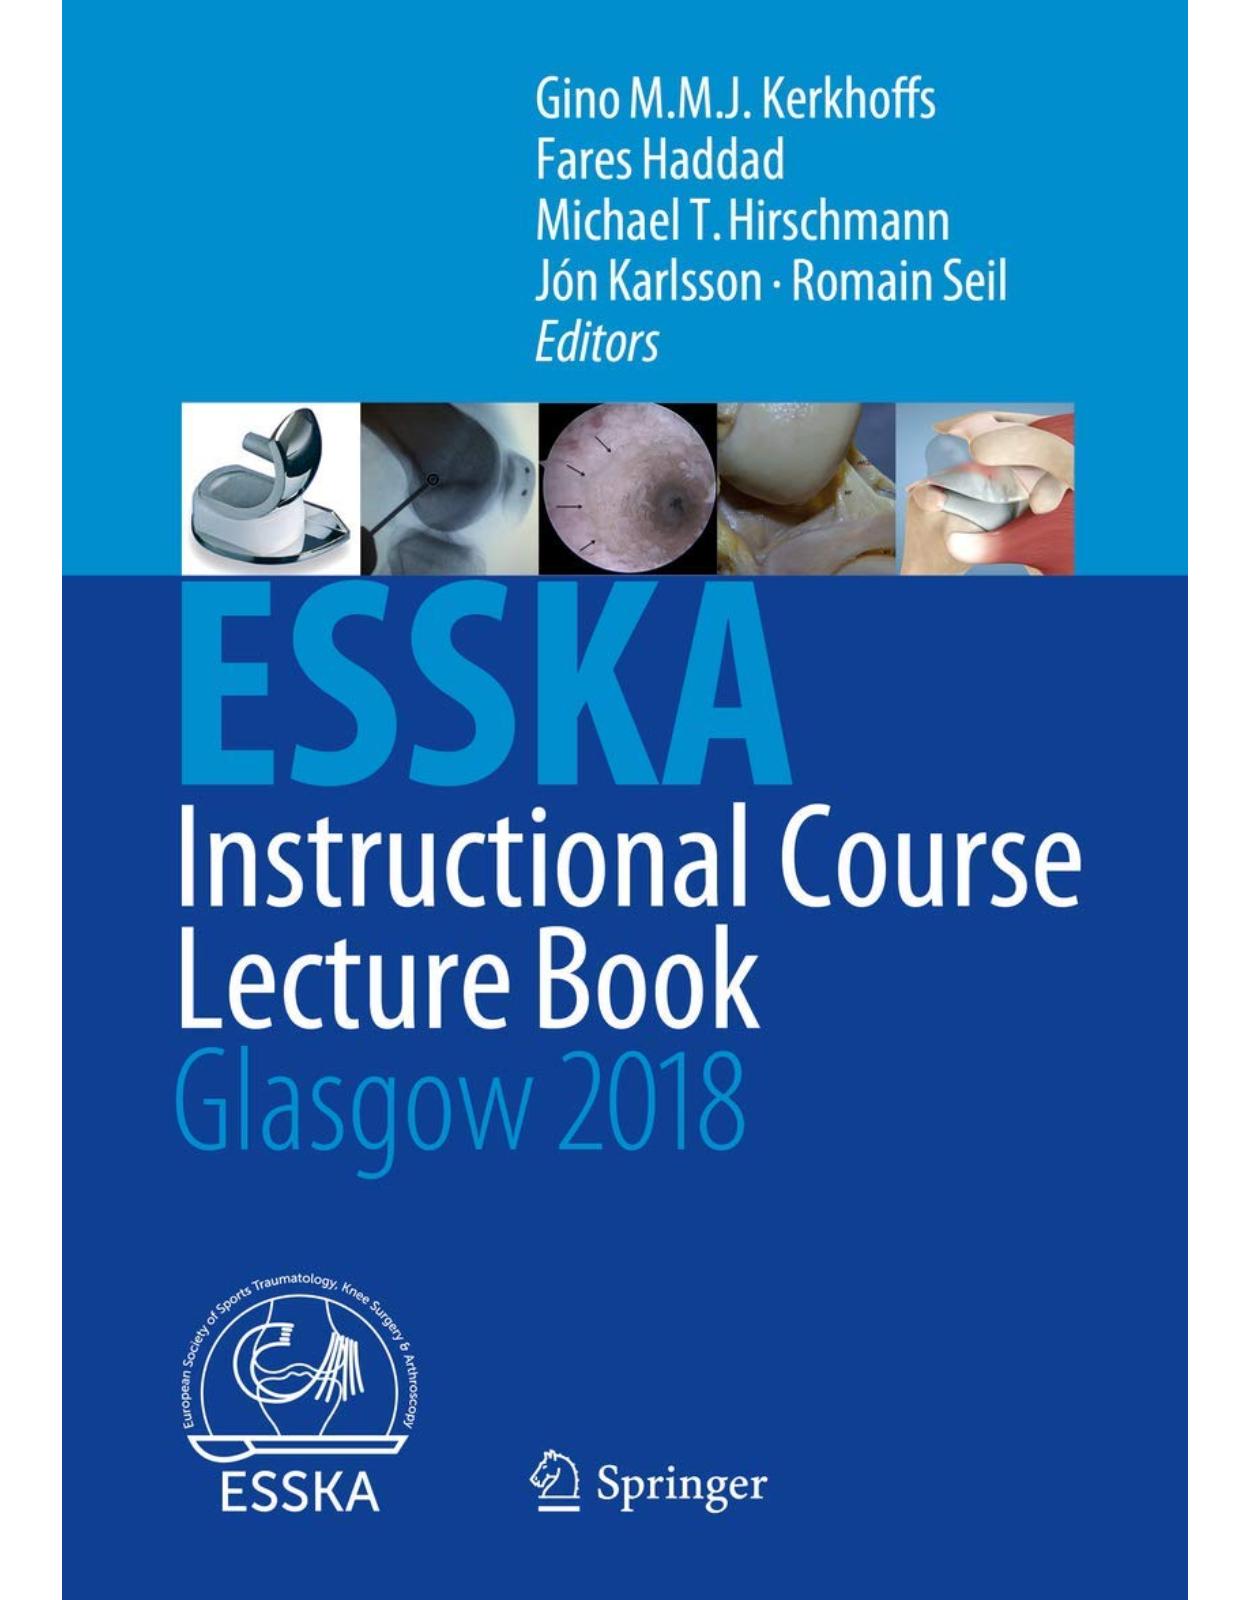 ESSKA Instructional Course Lecture Book: Glasgow 2018